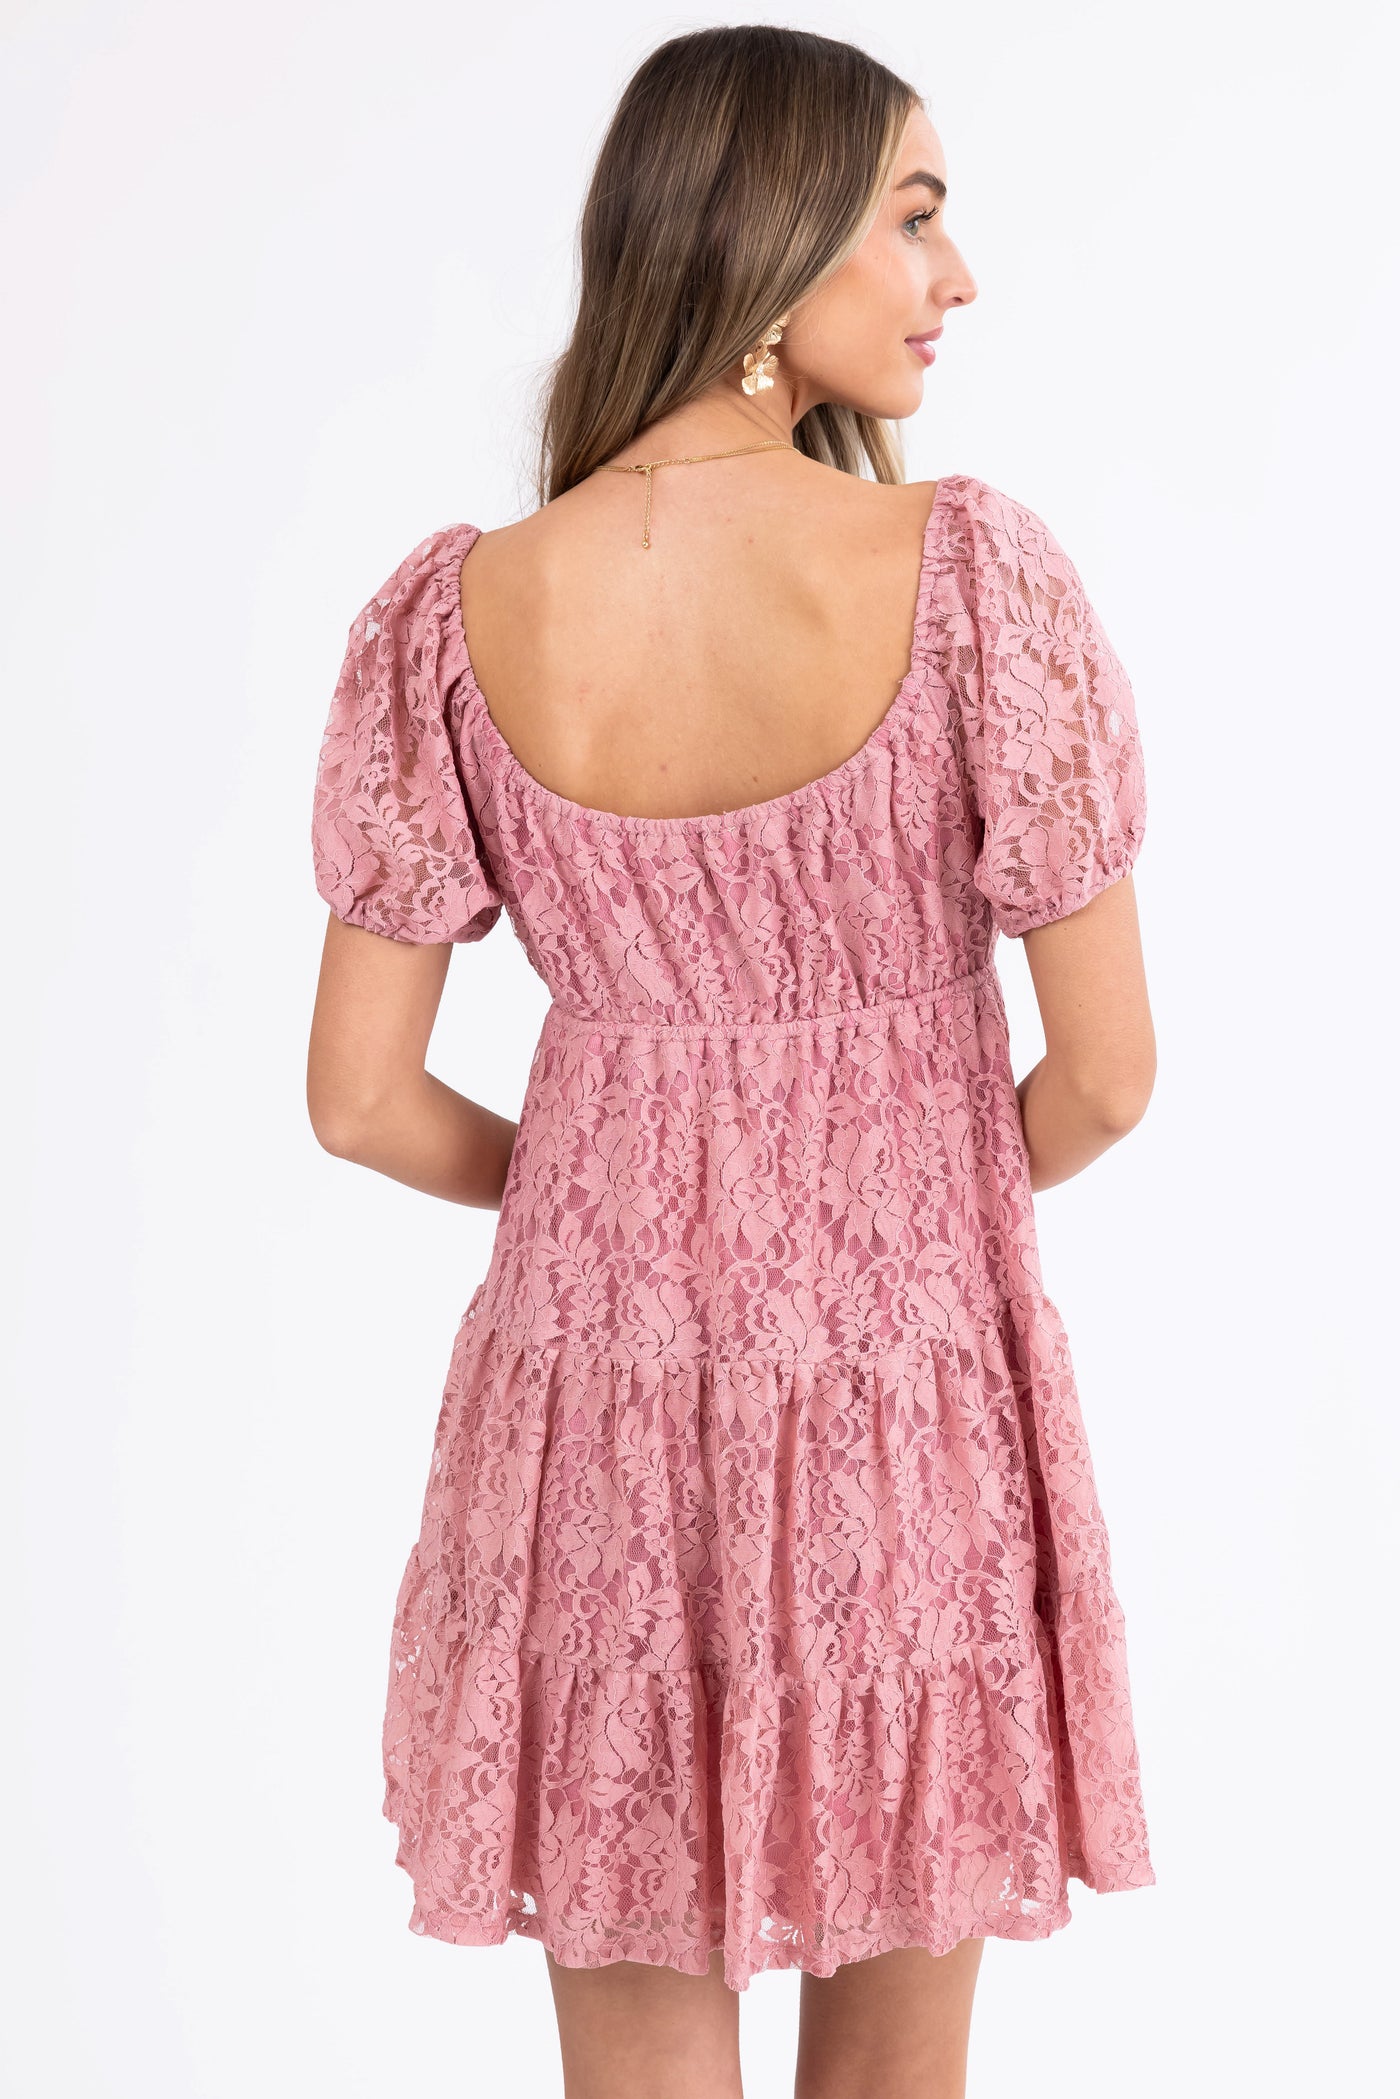 Dusty Rose Floral Lace Tiered Short Dress